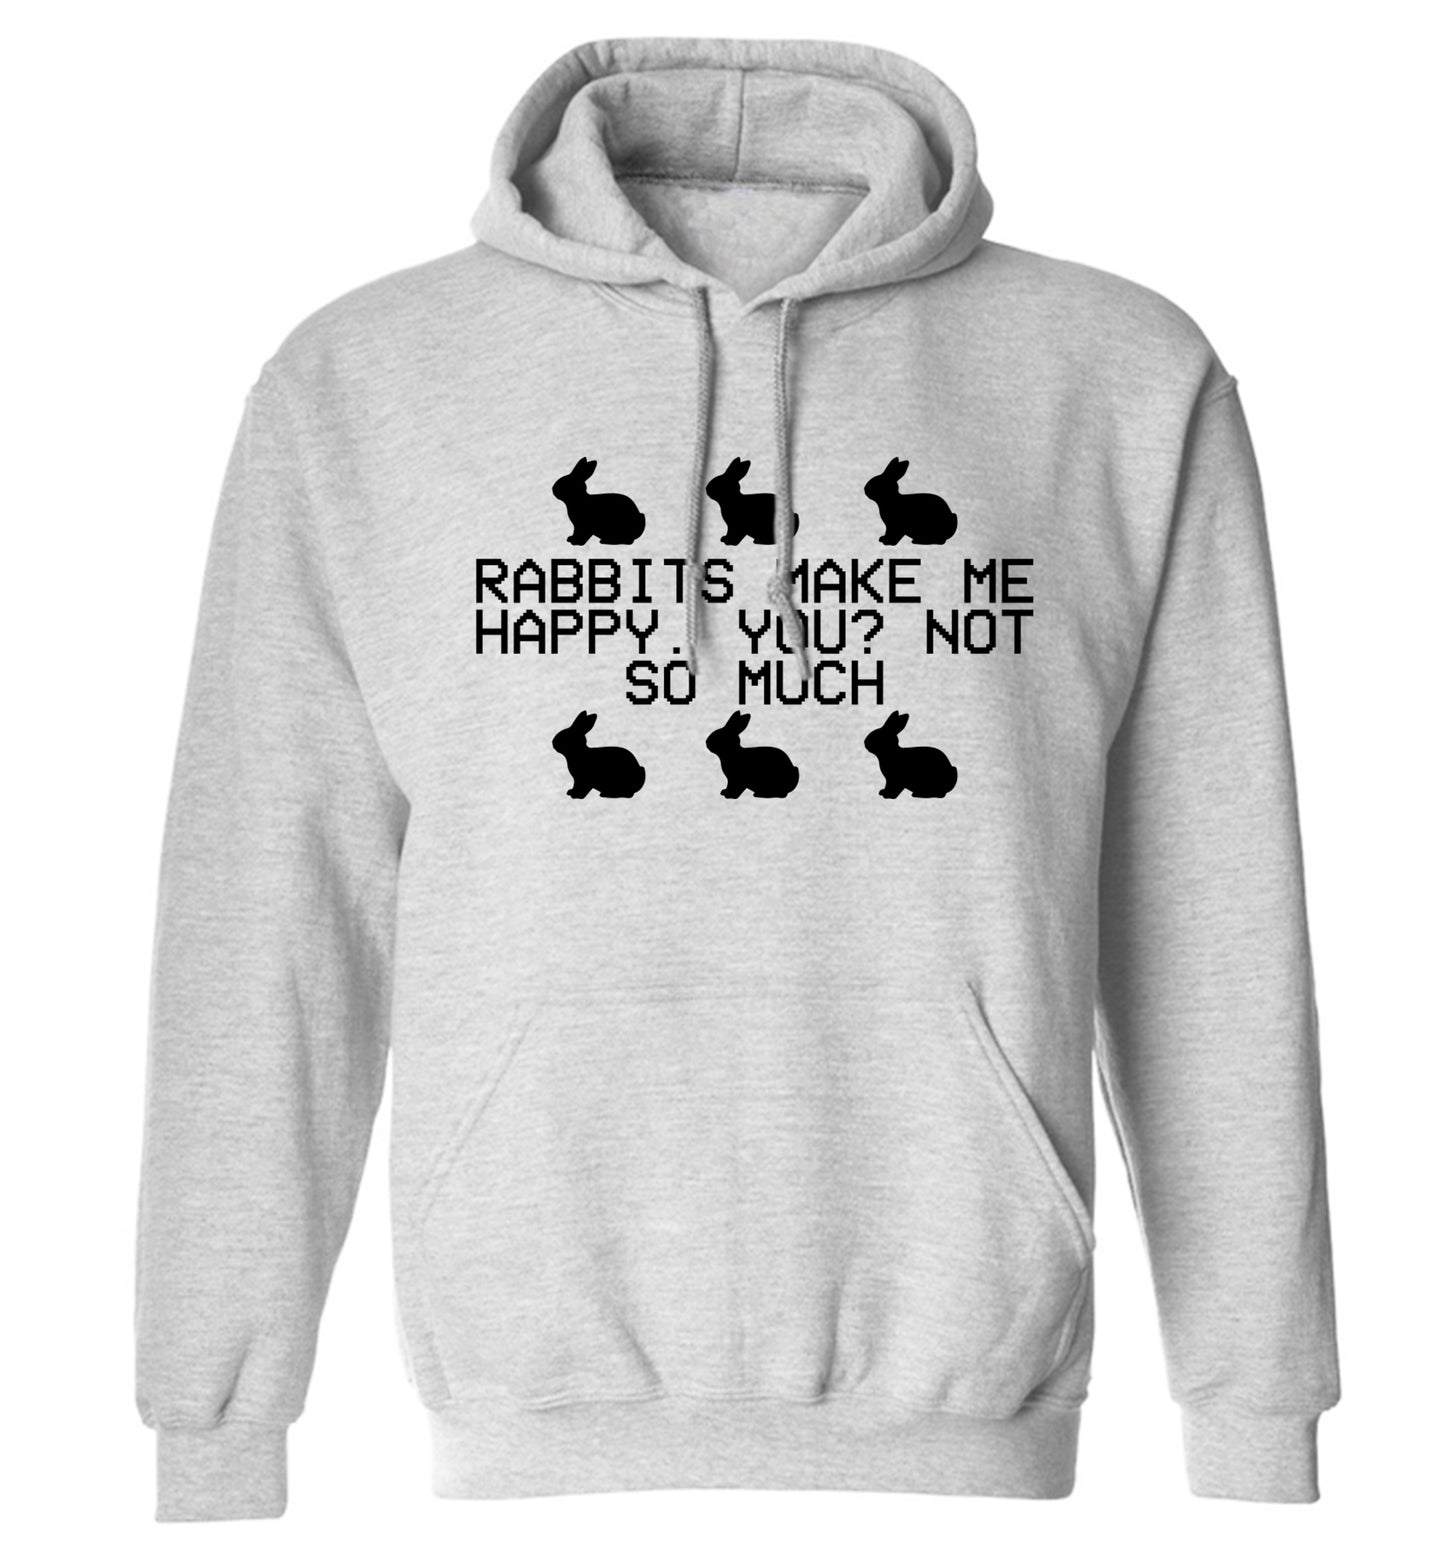 Rabbits make me happy, you not so much adults unisex grey hoodie 2XL